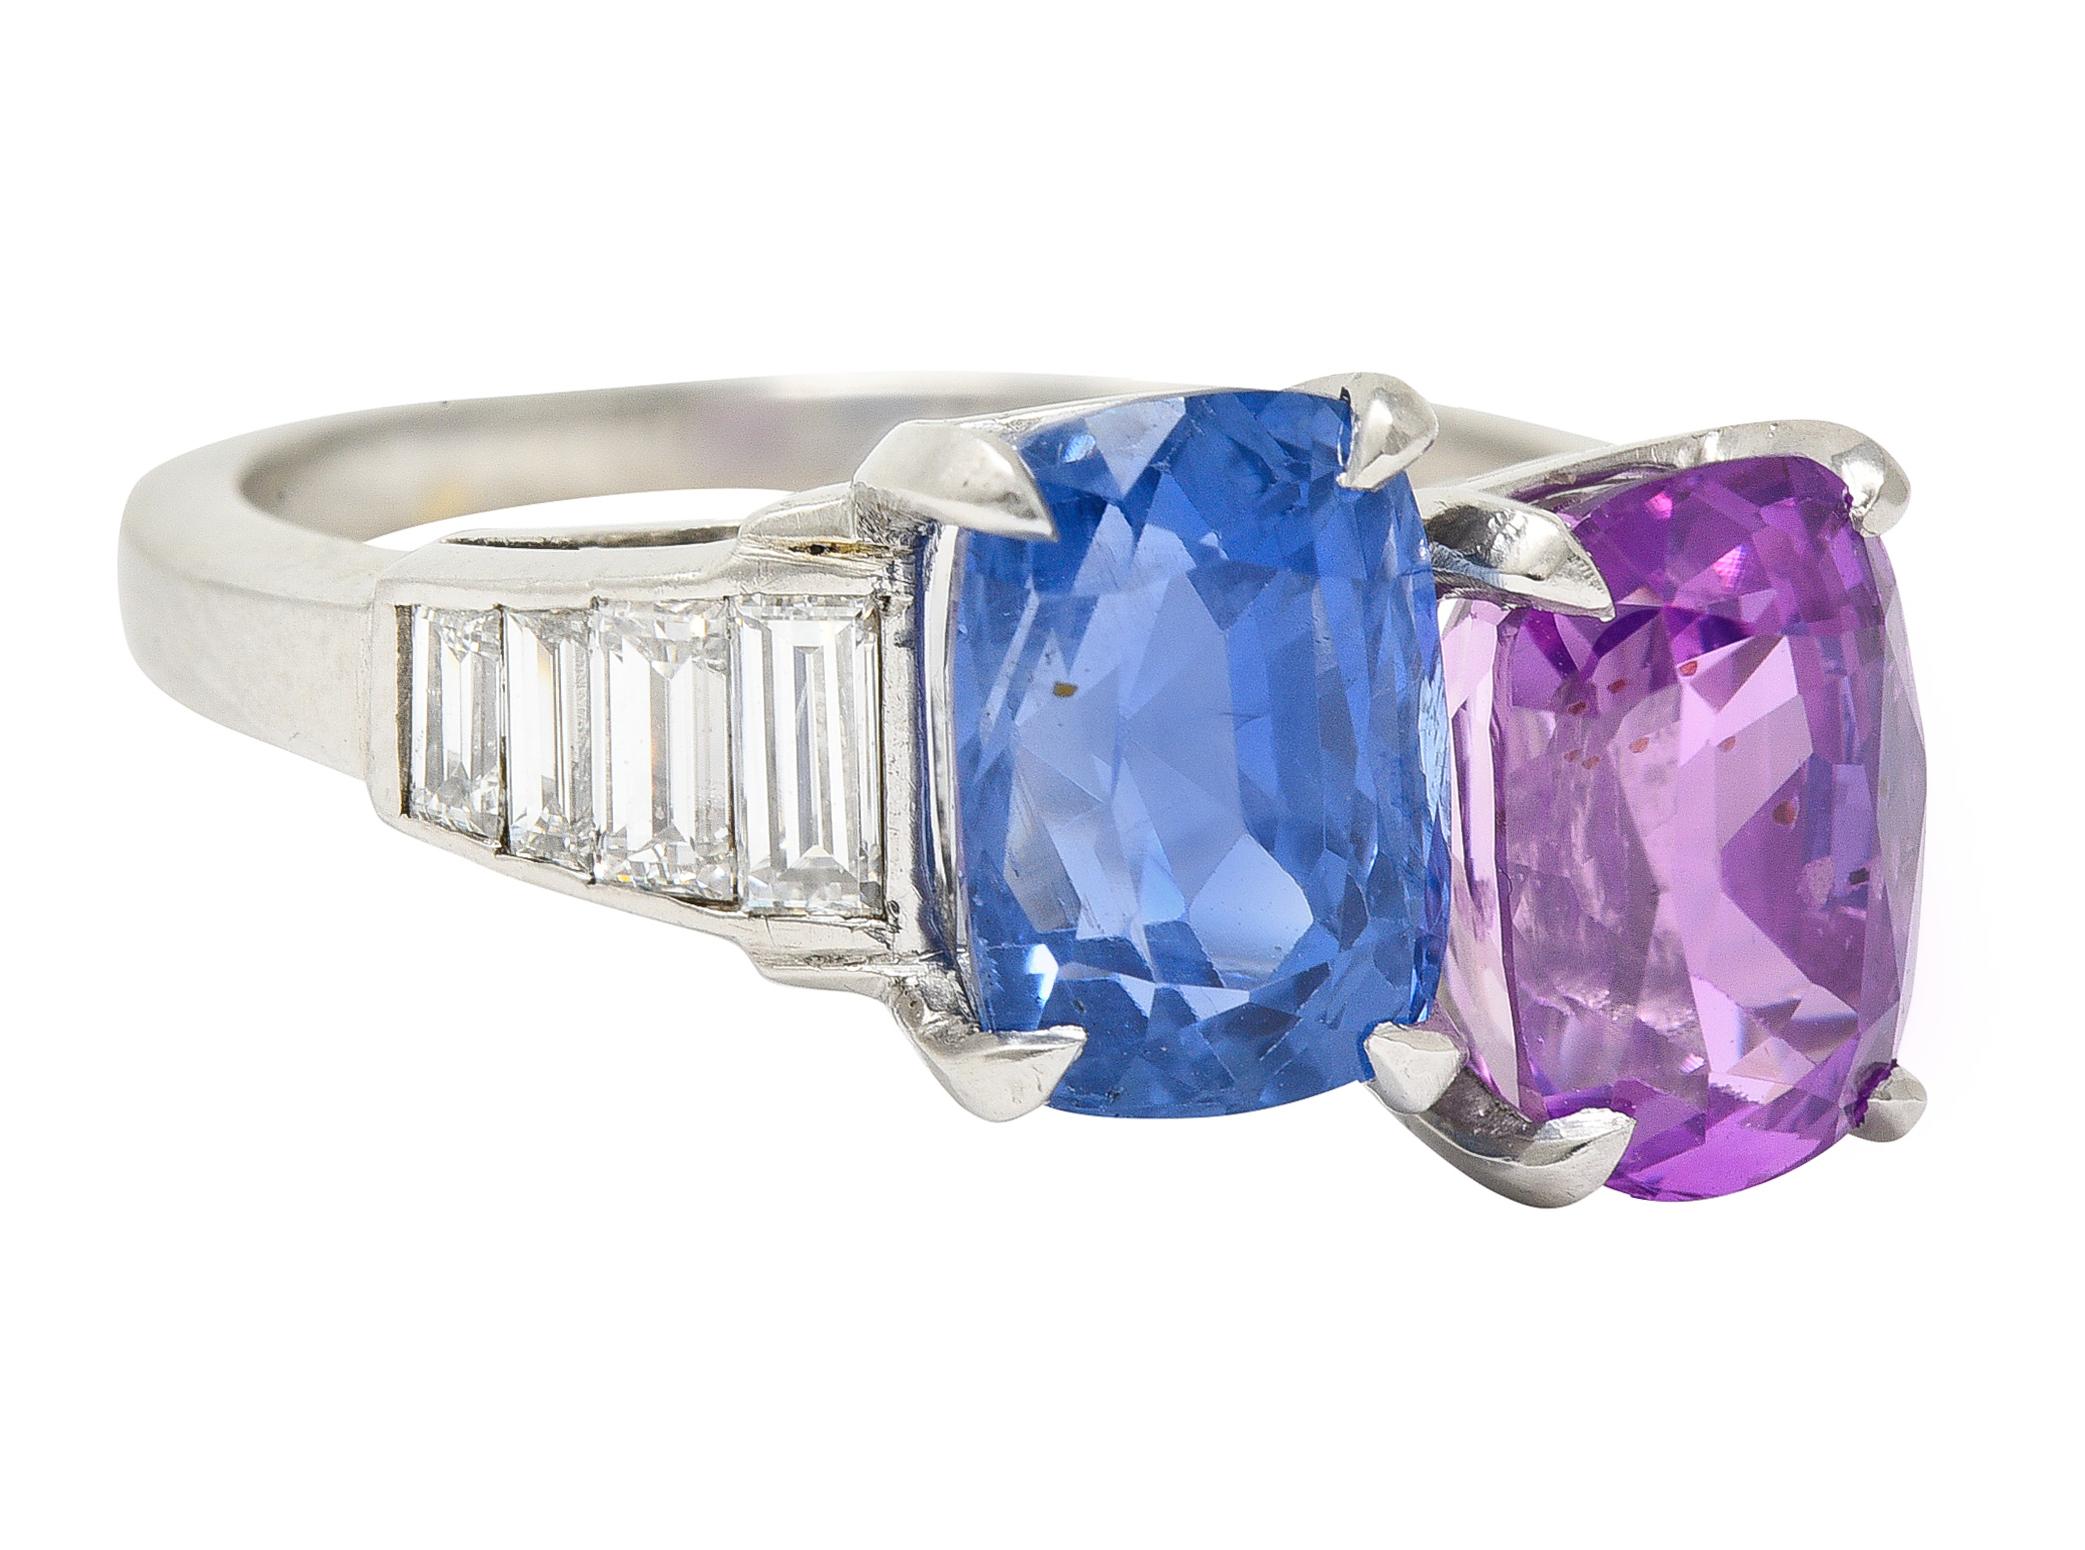 Designed as a bypass-style mounting terminating with two prong set cushion cut sapphires
One sapphire is transparent medium blue and weighs approximately 3.47 carats
The other is transparent medium purplish-pink in color and weighs approximately